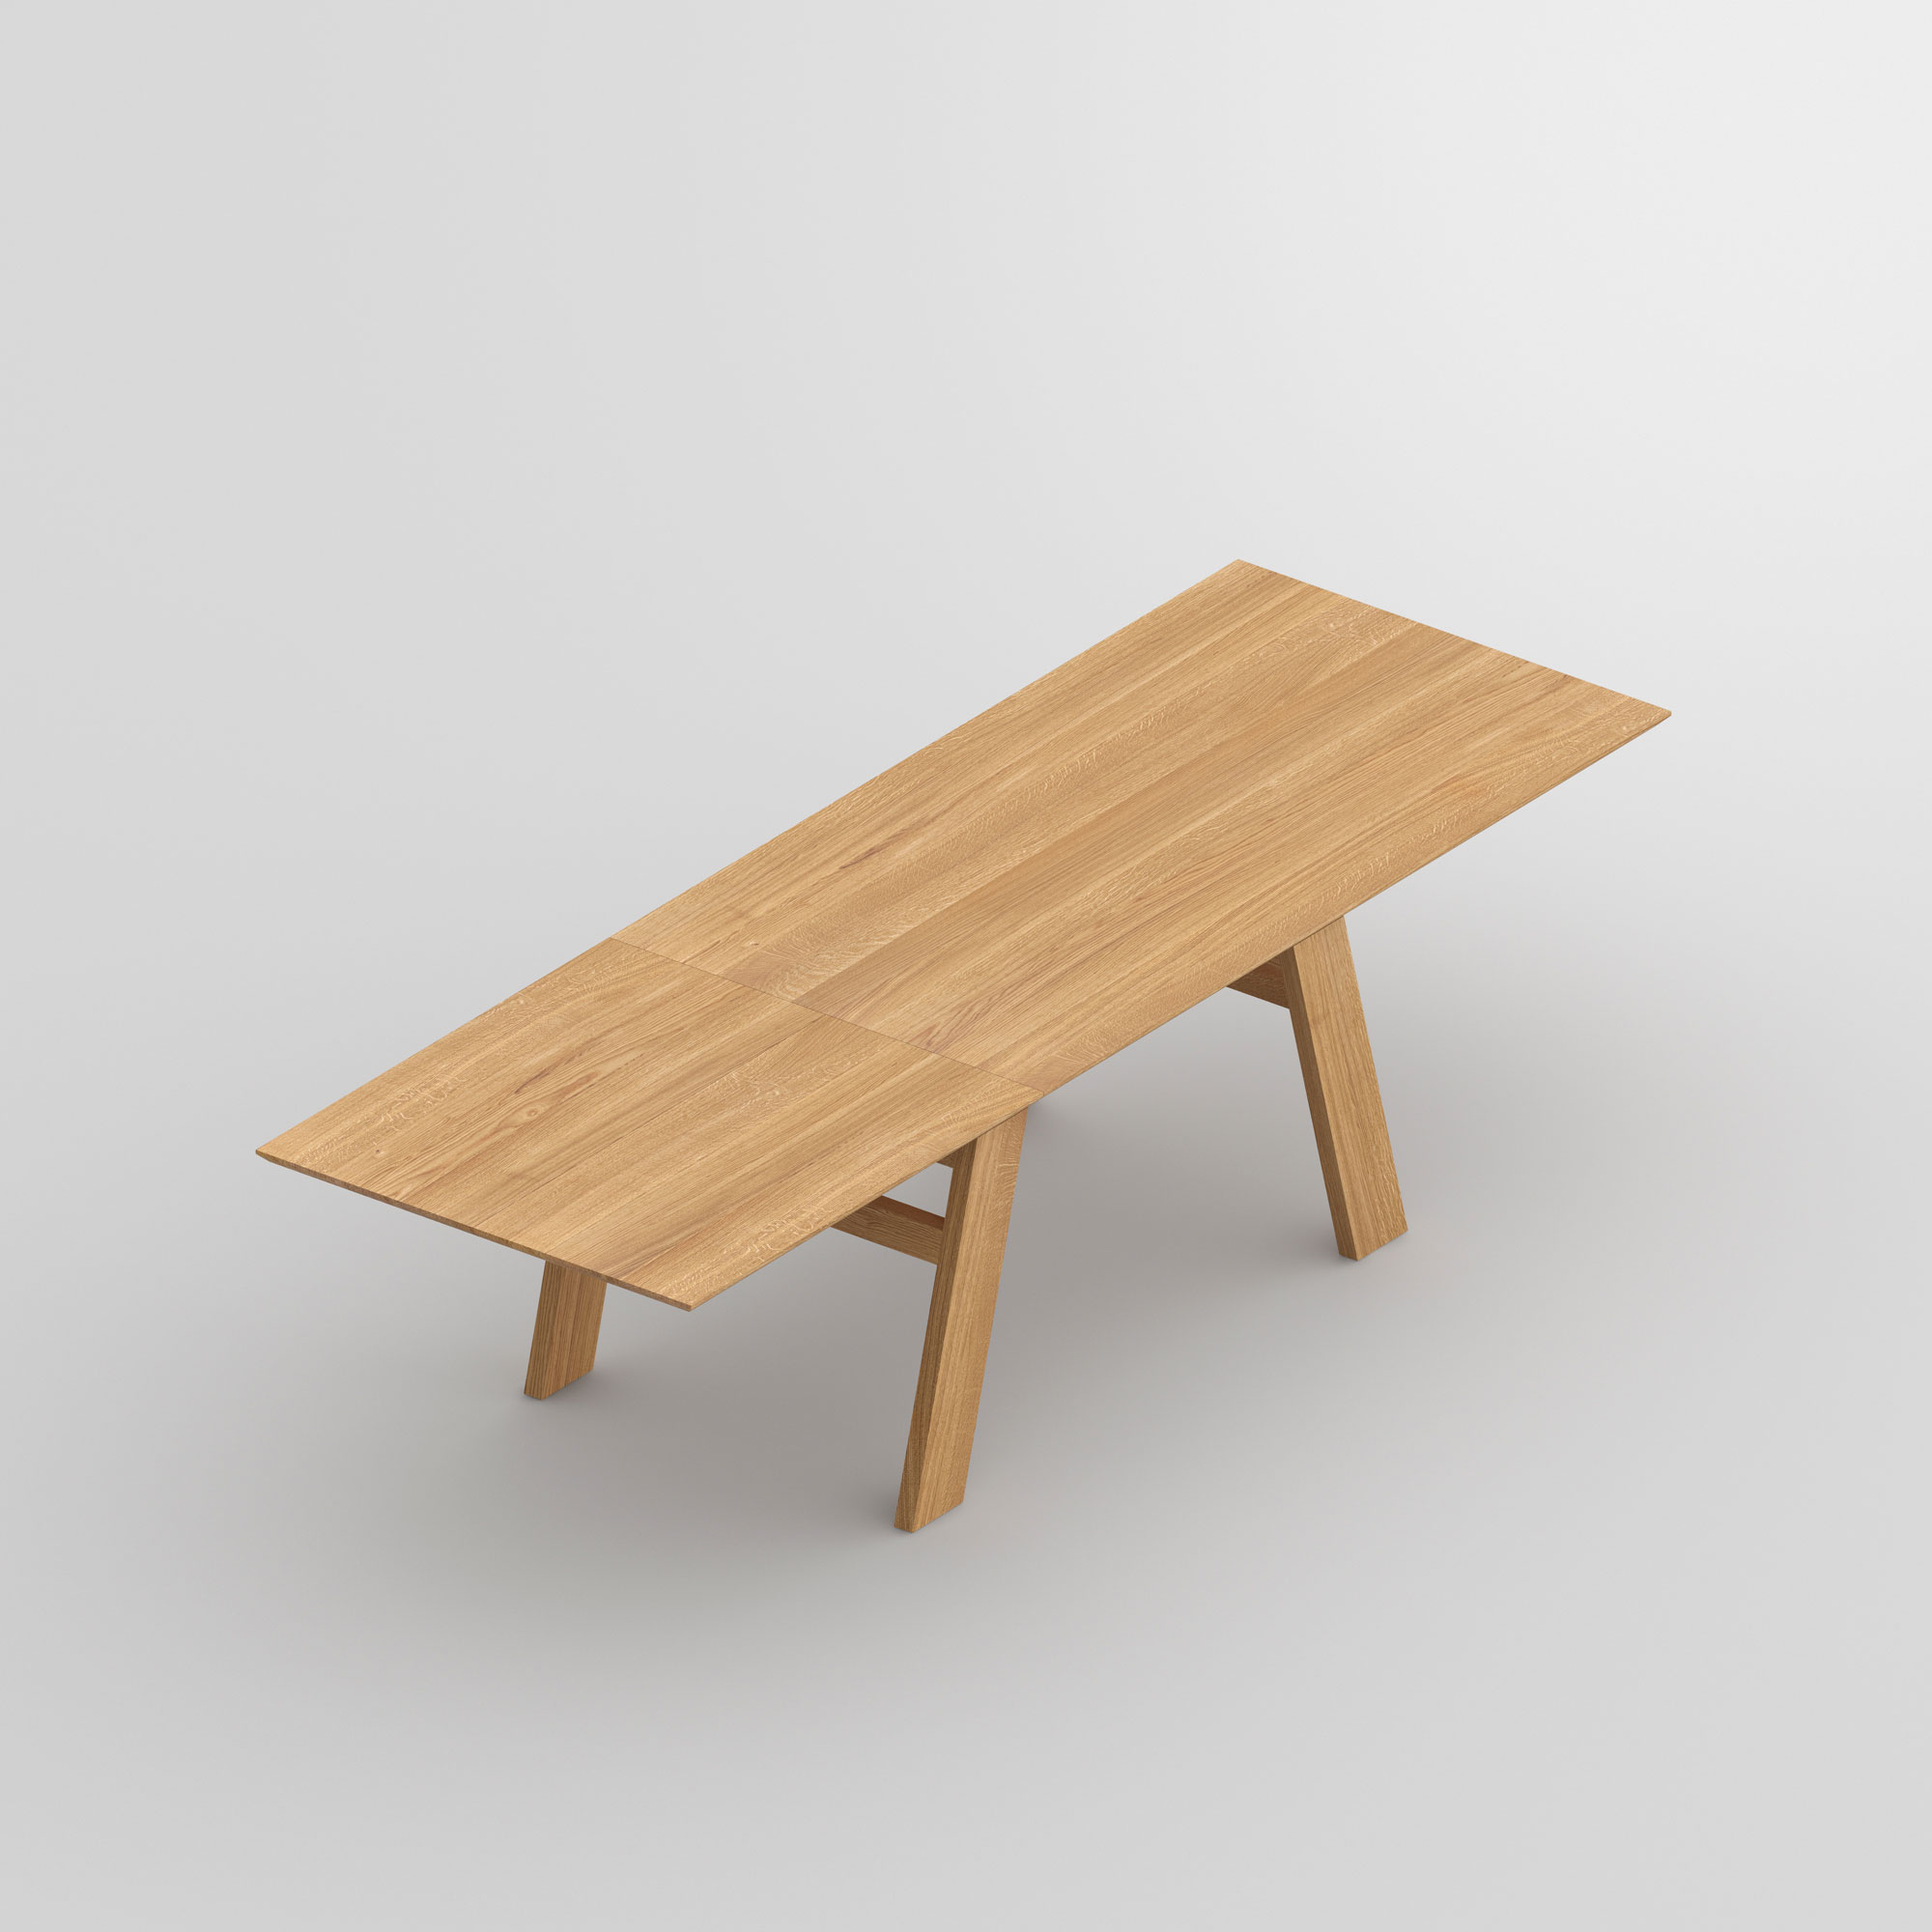 Solid Wood Extendable Table CULTUS BUTTERFLY cam3 custom made in solid wood by vitamin design